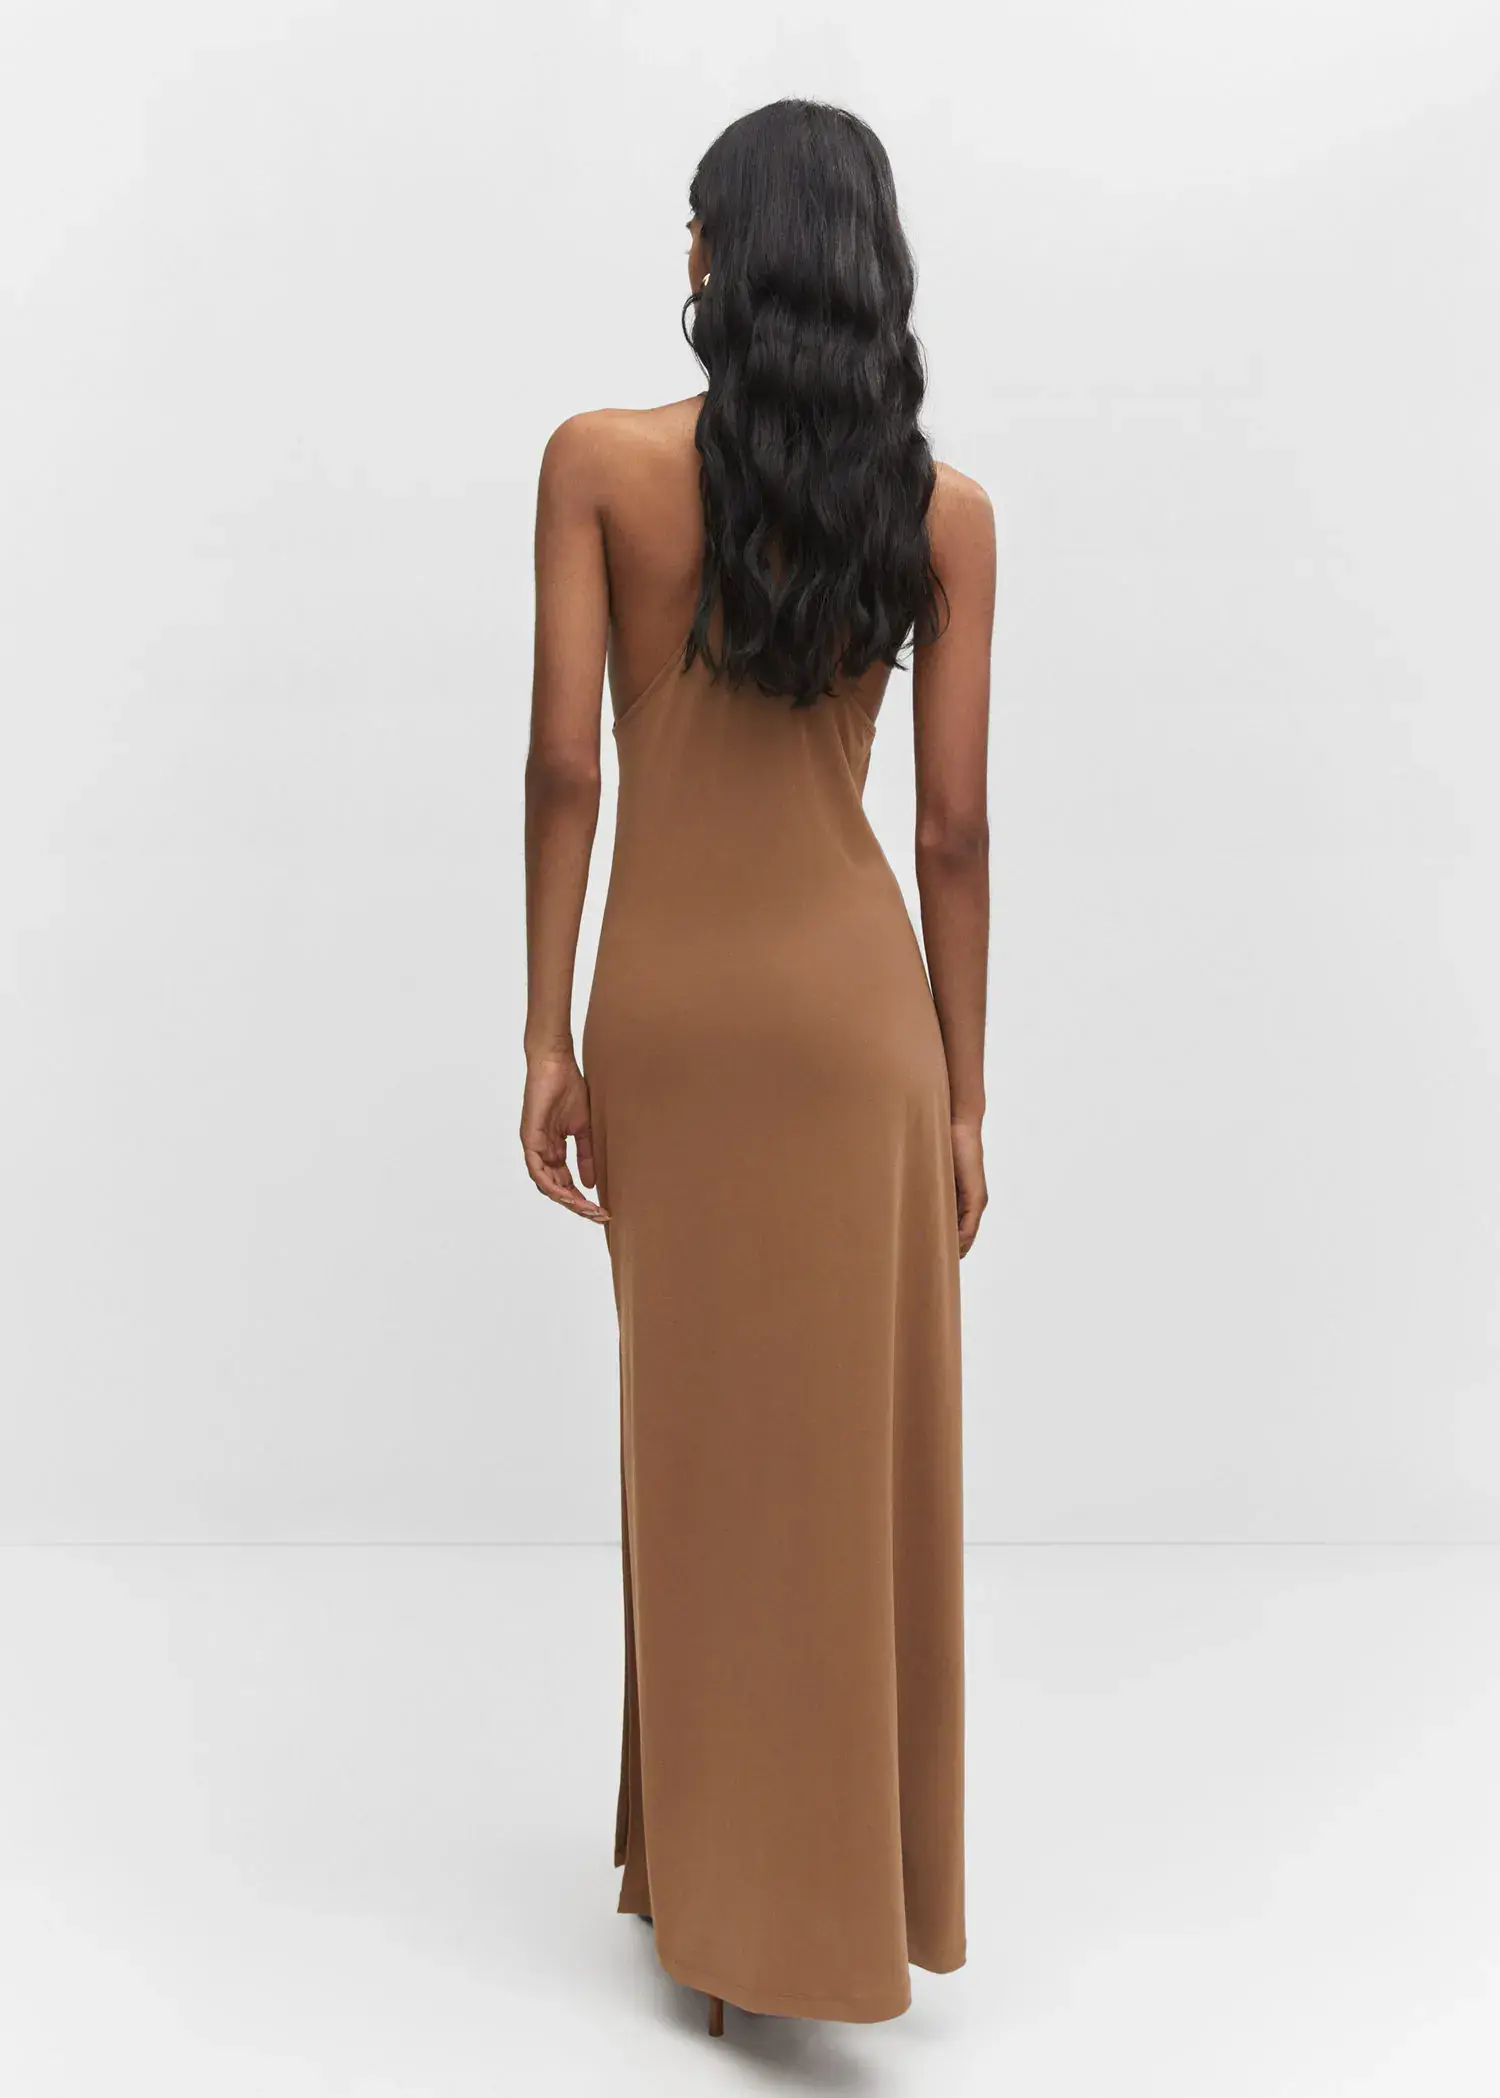 Mango Halter-neck modal dress. a woman in a tan dress standing in front of a wall. 